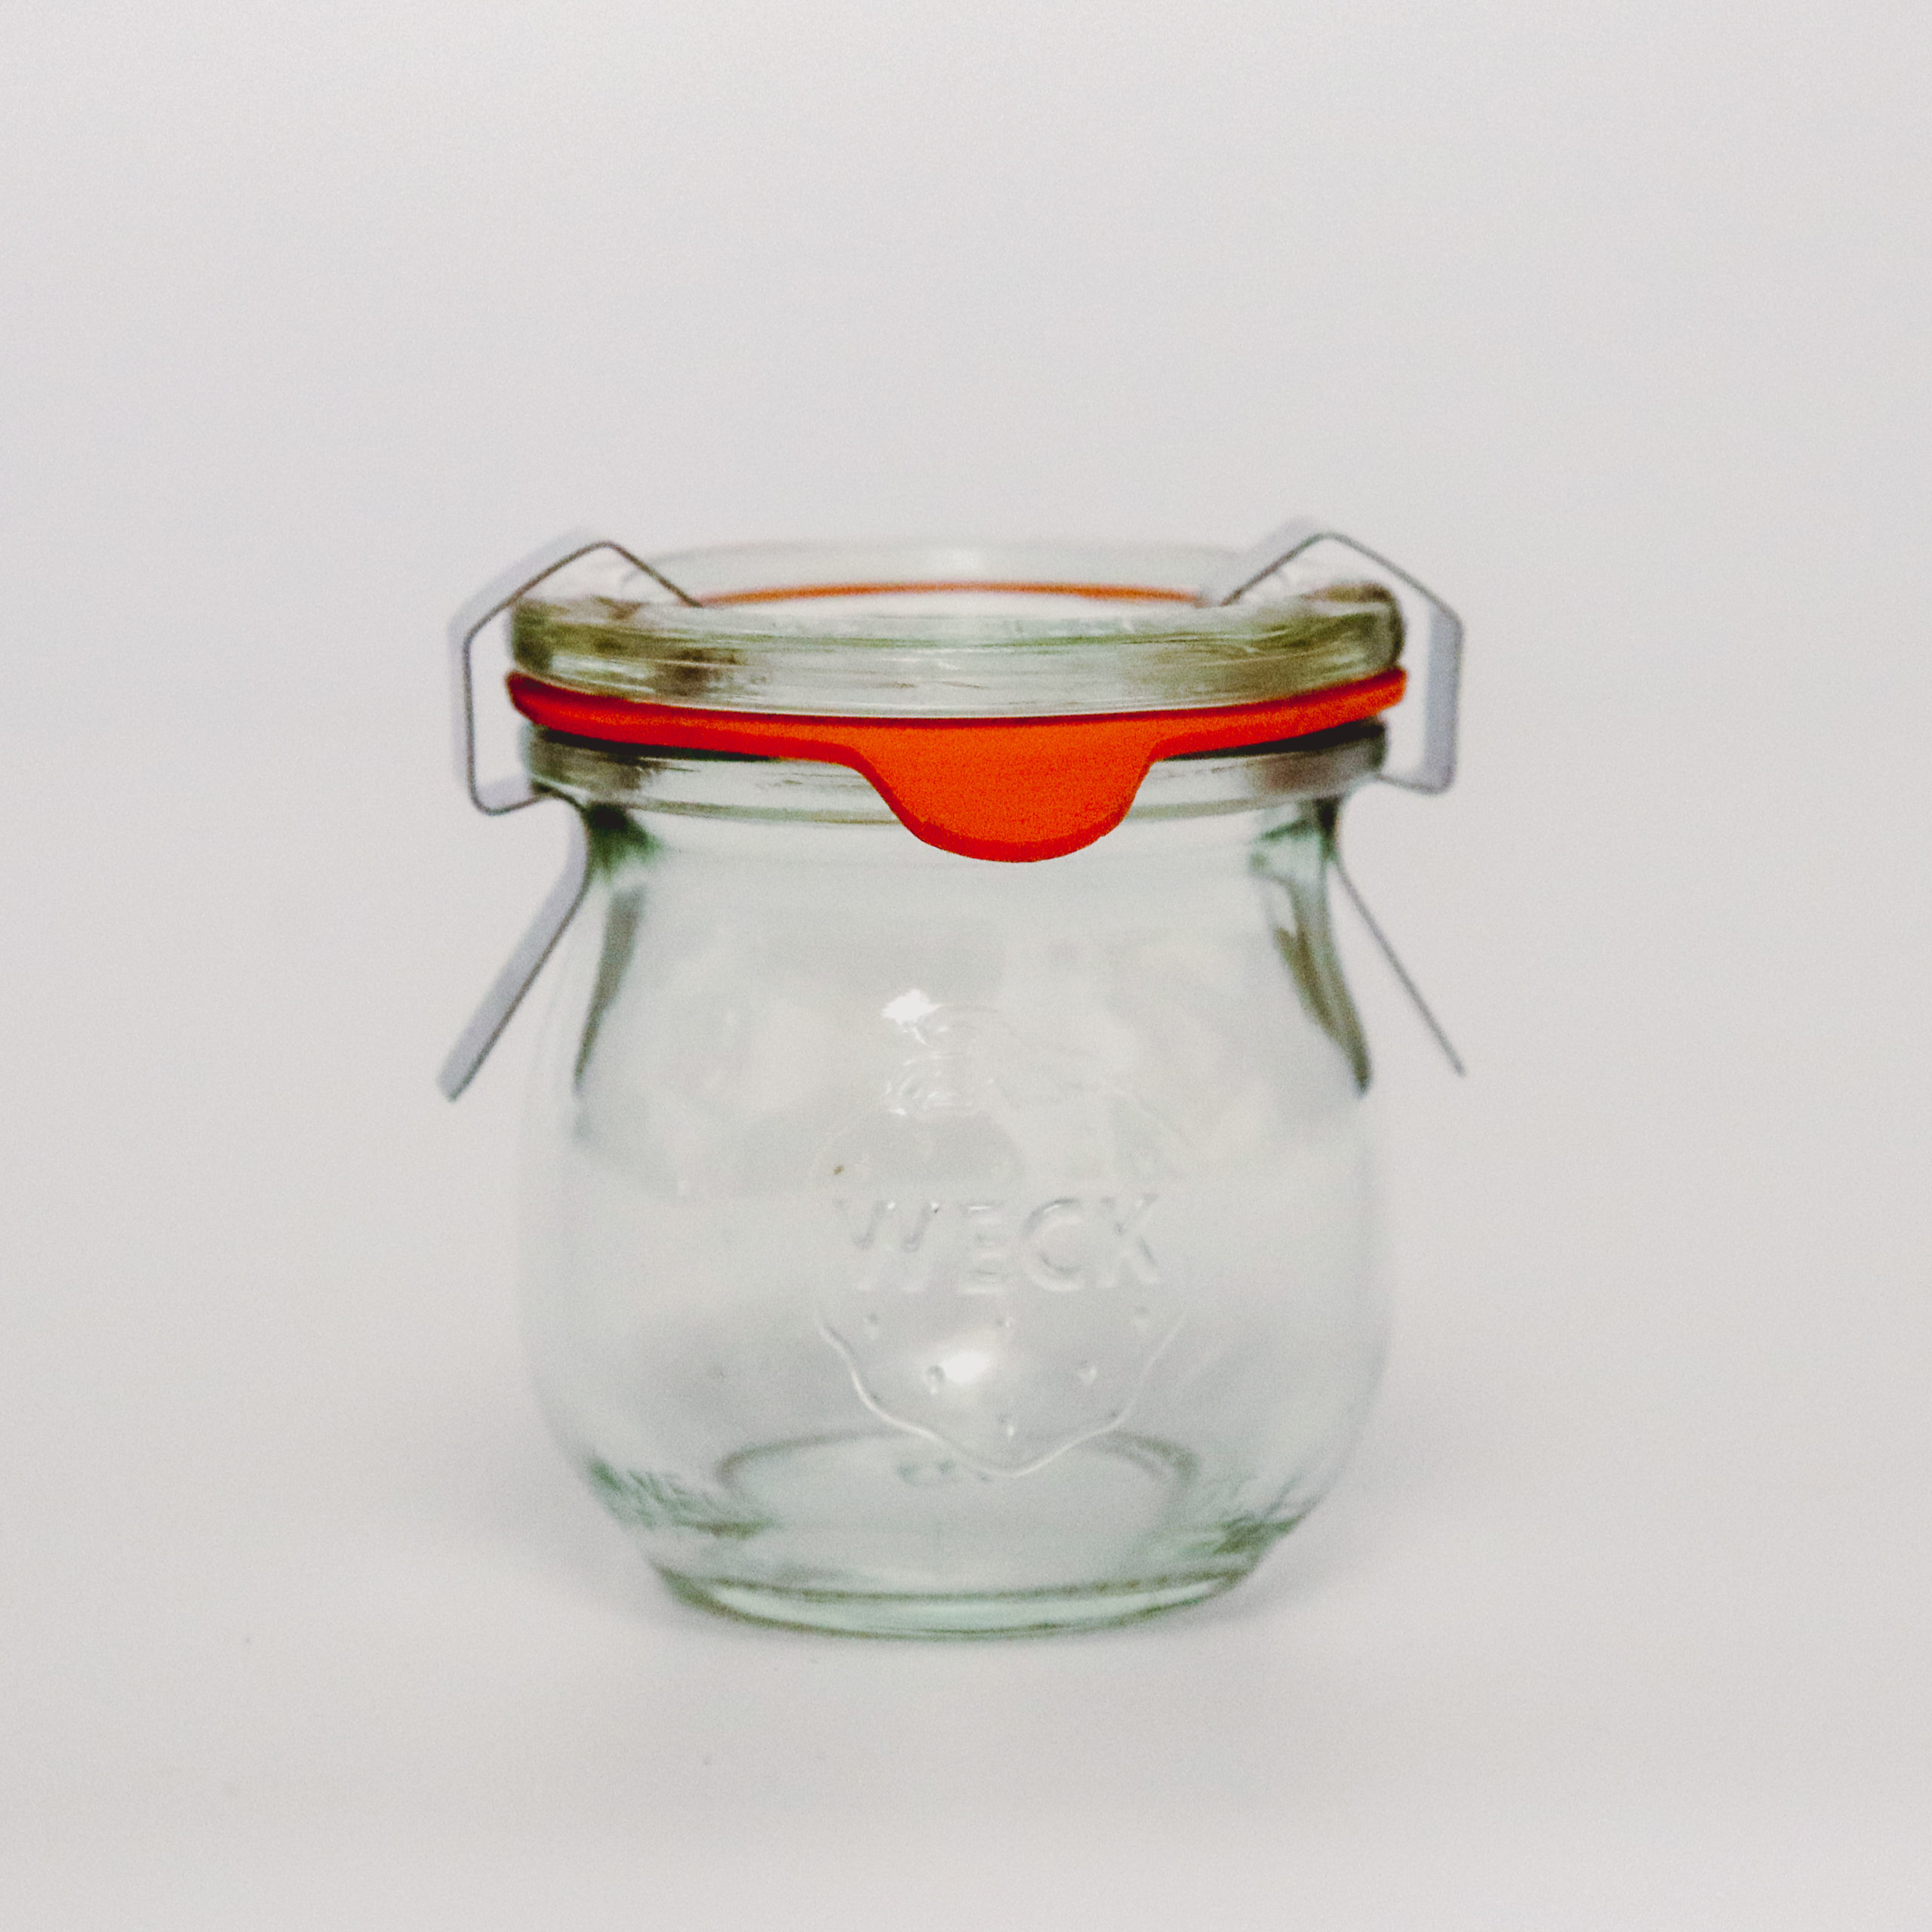 Small size cookie jar with lid